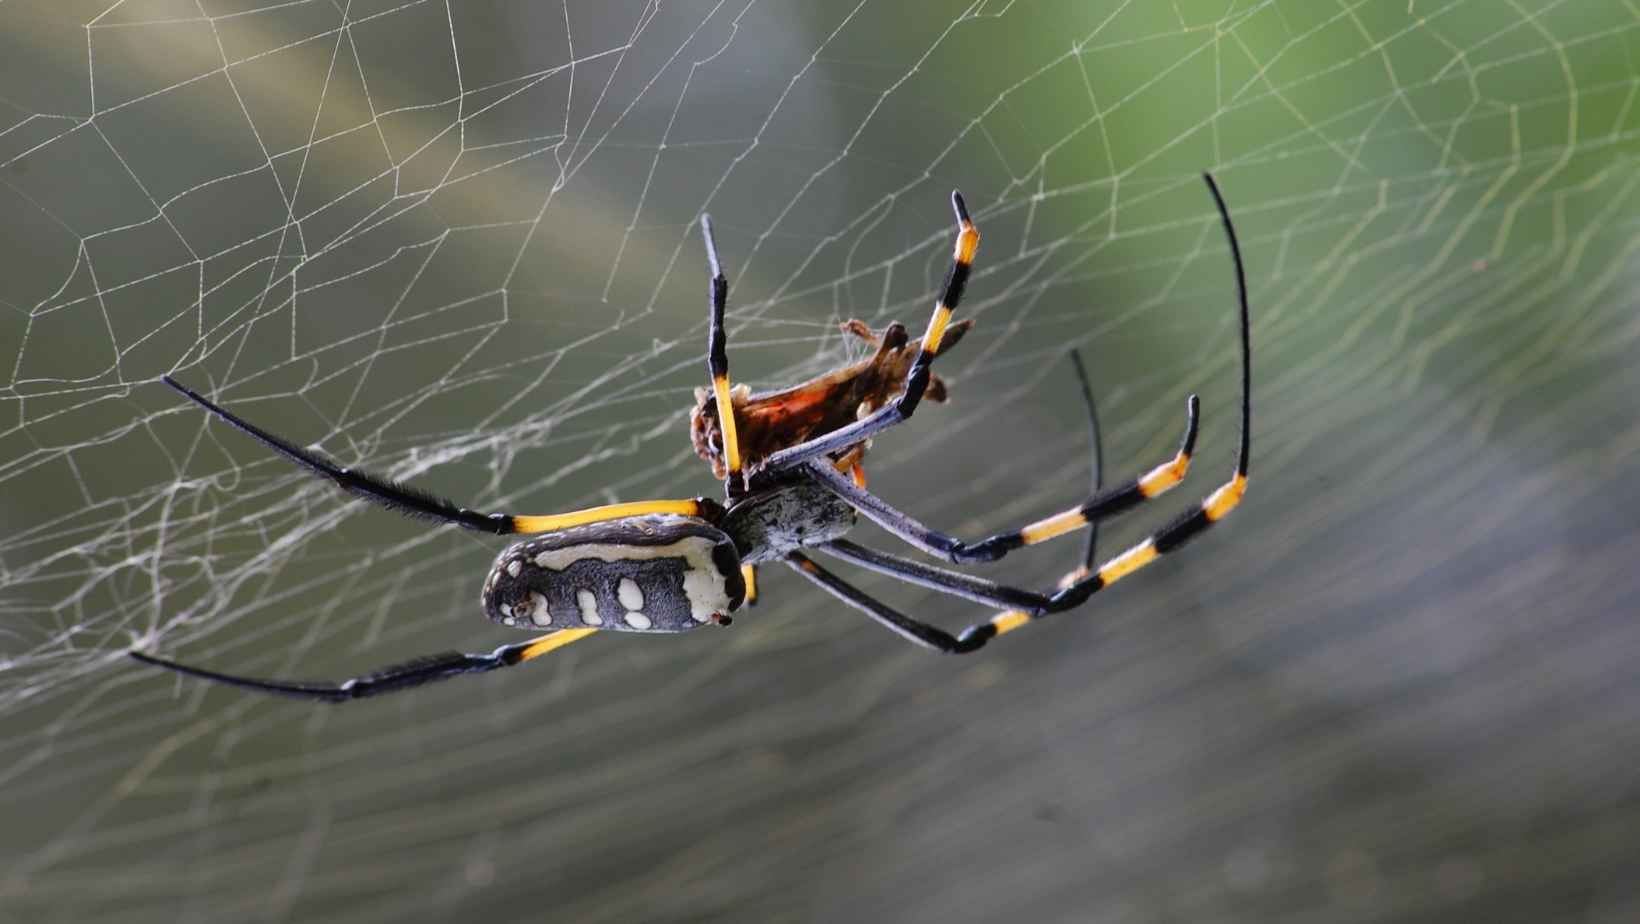 Yellow and black spider